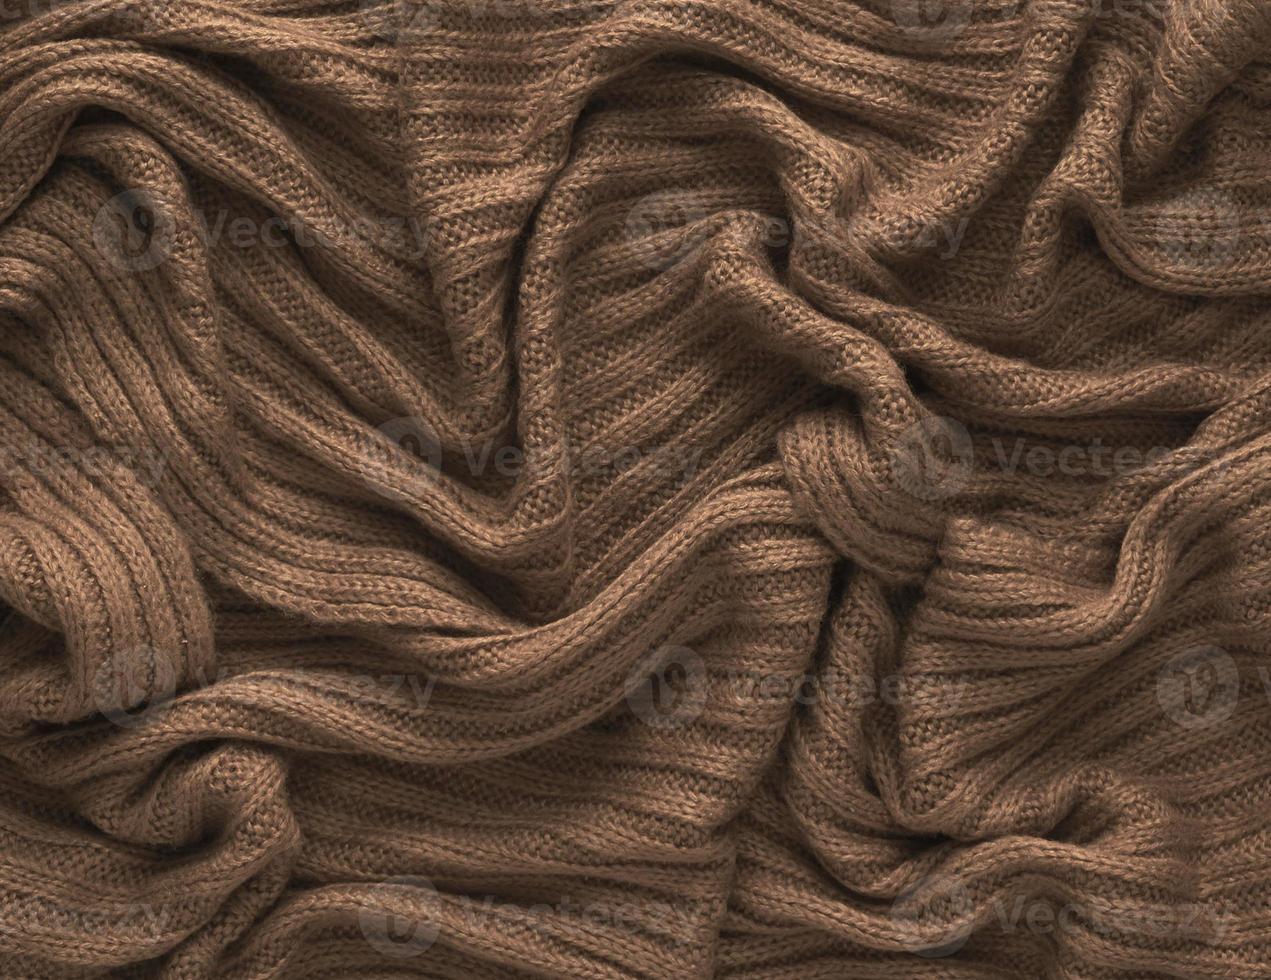 Brown crumpled knitted scarf or sweater texture, top view. Texture background of warm crocheted clothing textile. Knitwear fabric photo